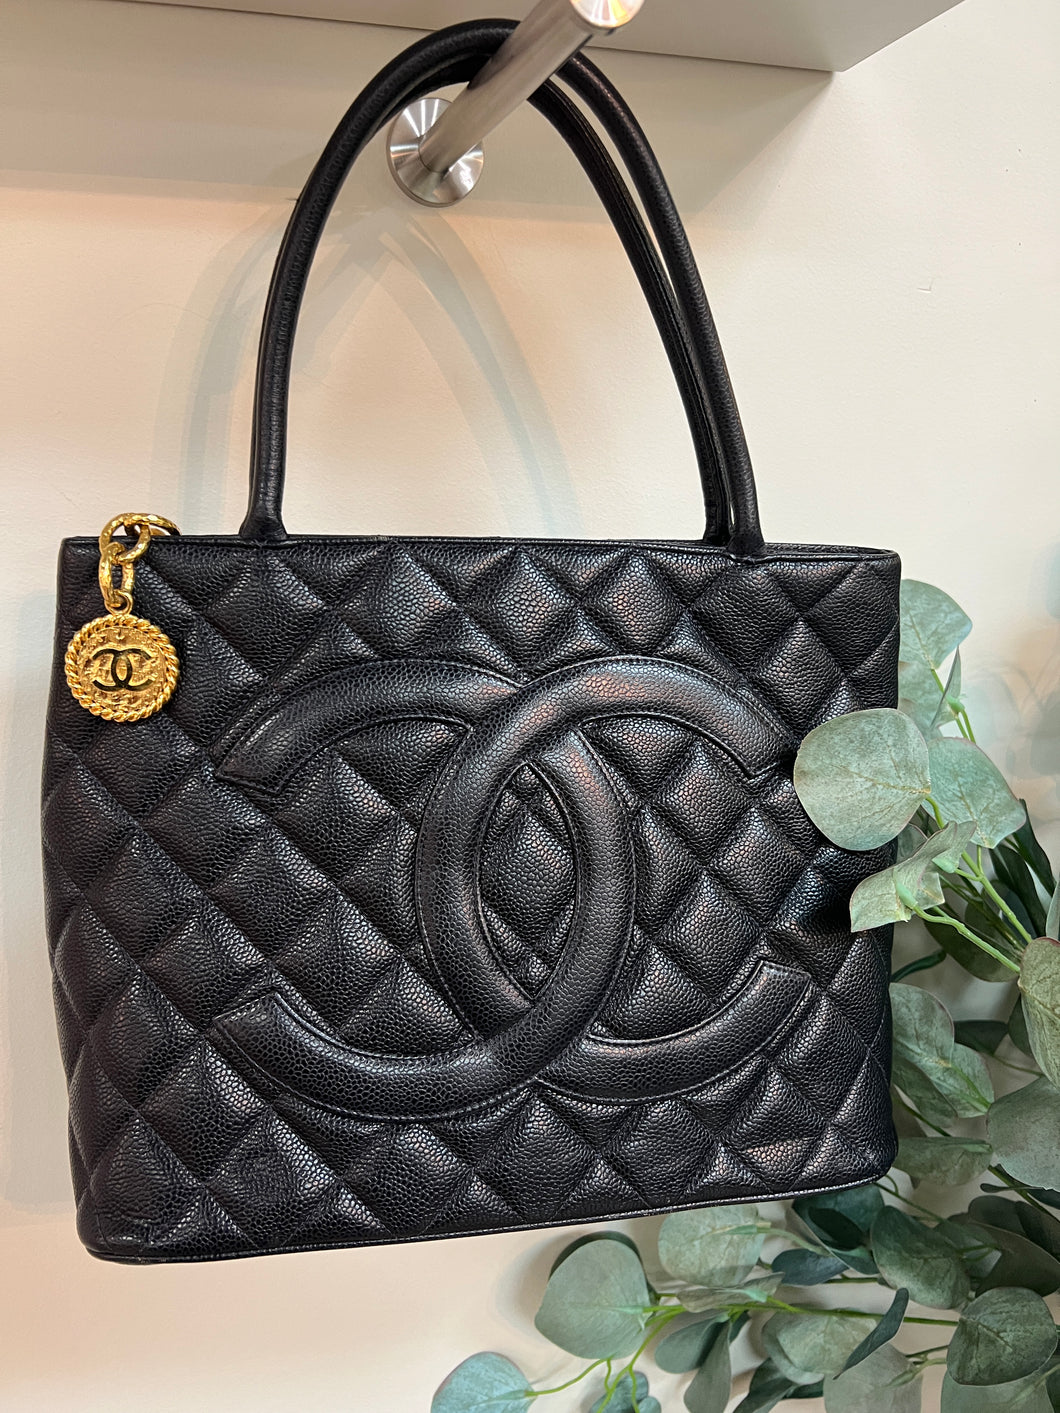 Authentic Chanel Navy Medallion Tote with Gold Hardware